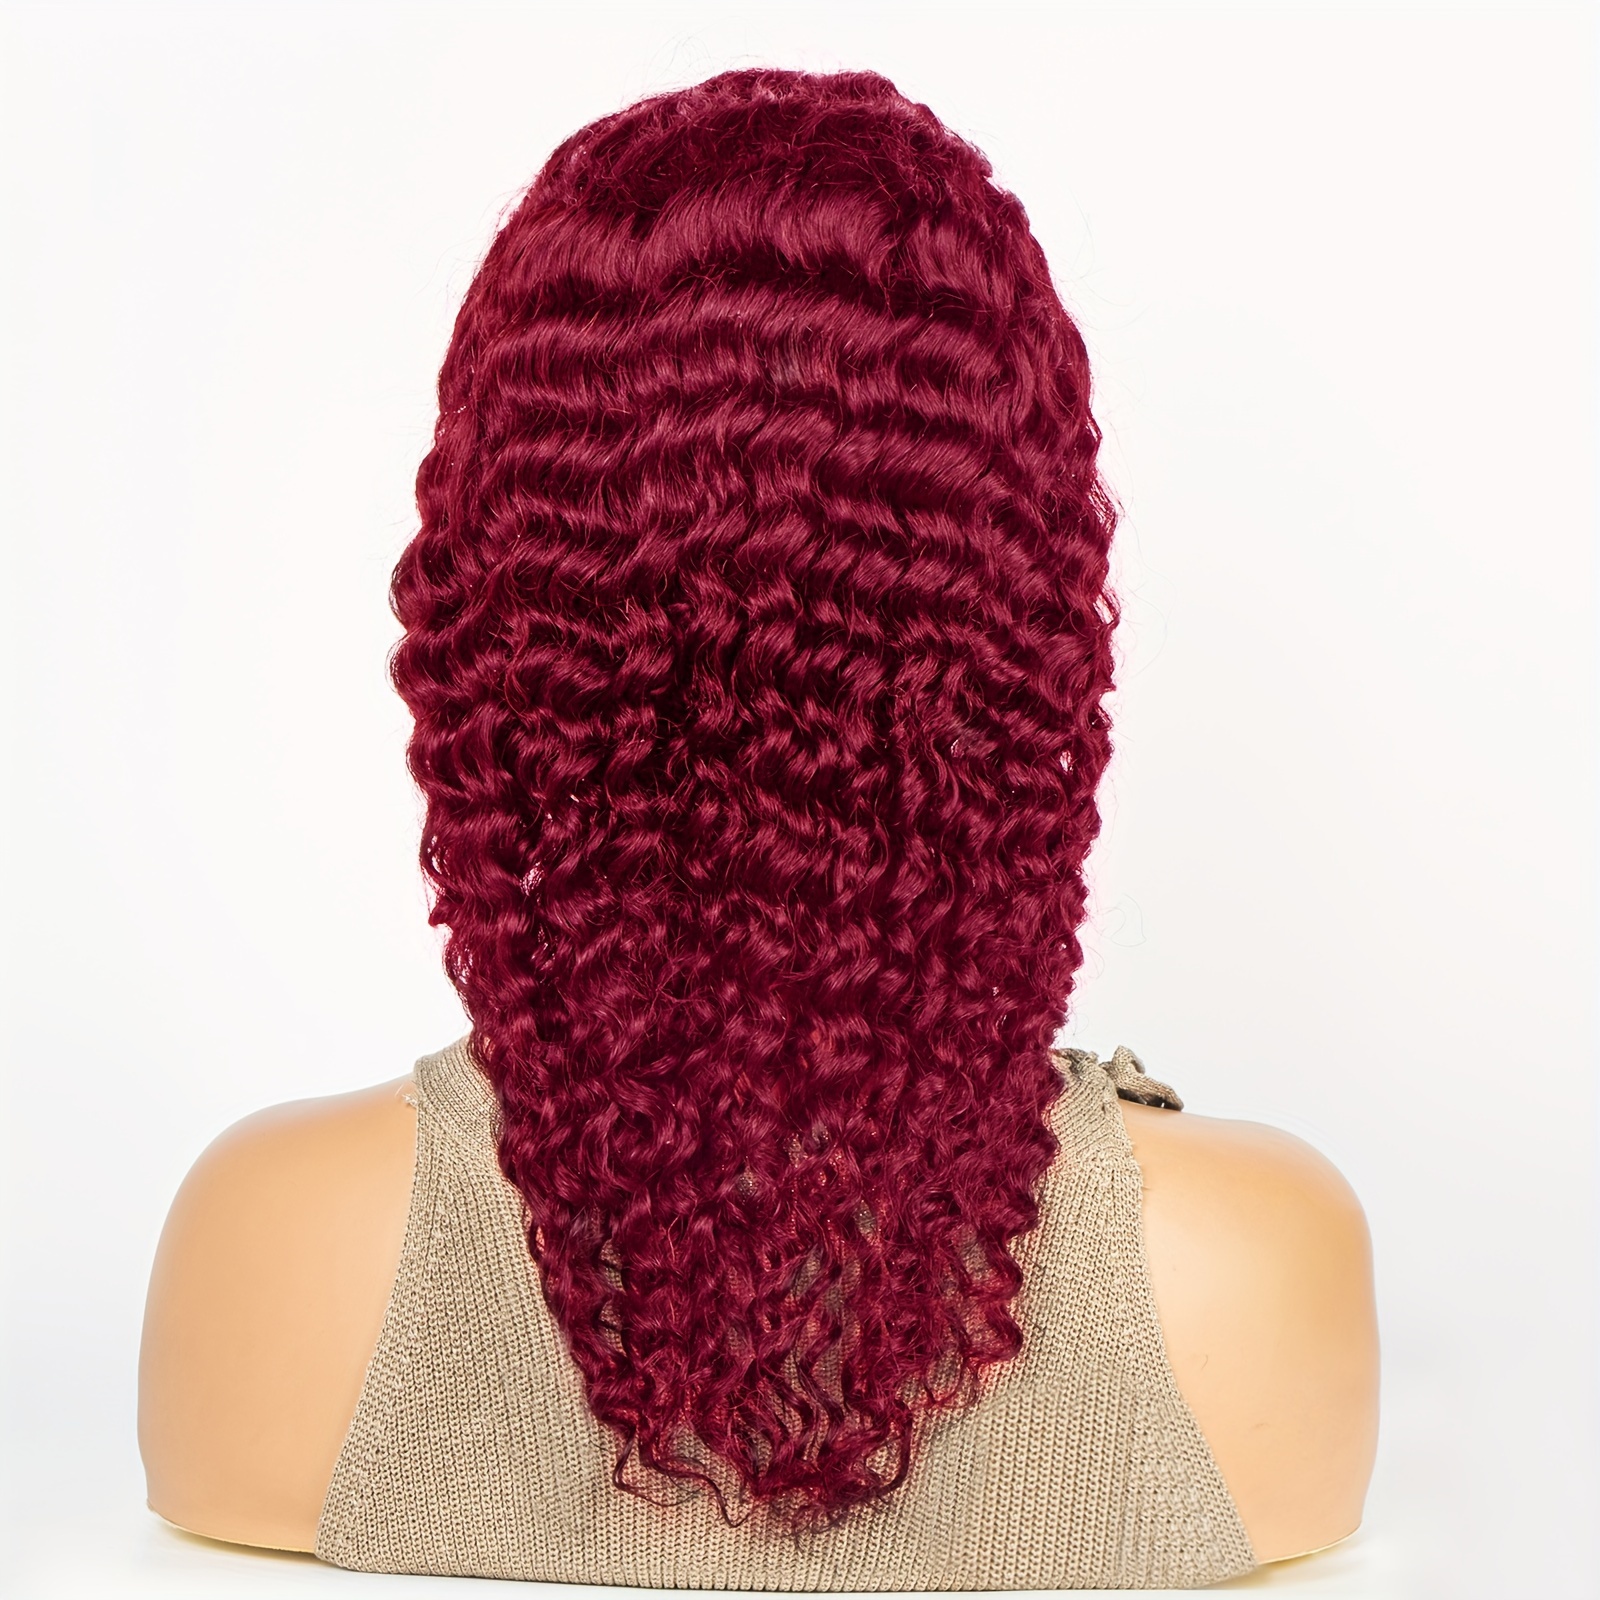 Dark Cherry Red 13x6 Human Hair Lace Frontal Wig Pre Colored Lace